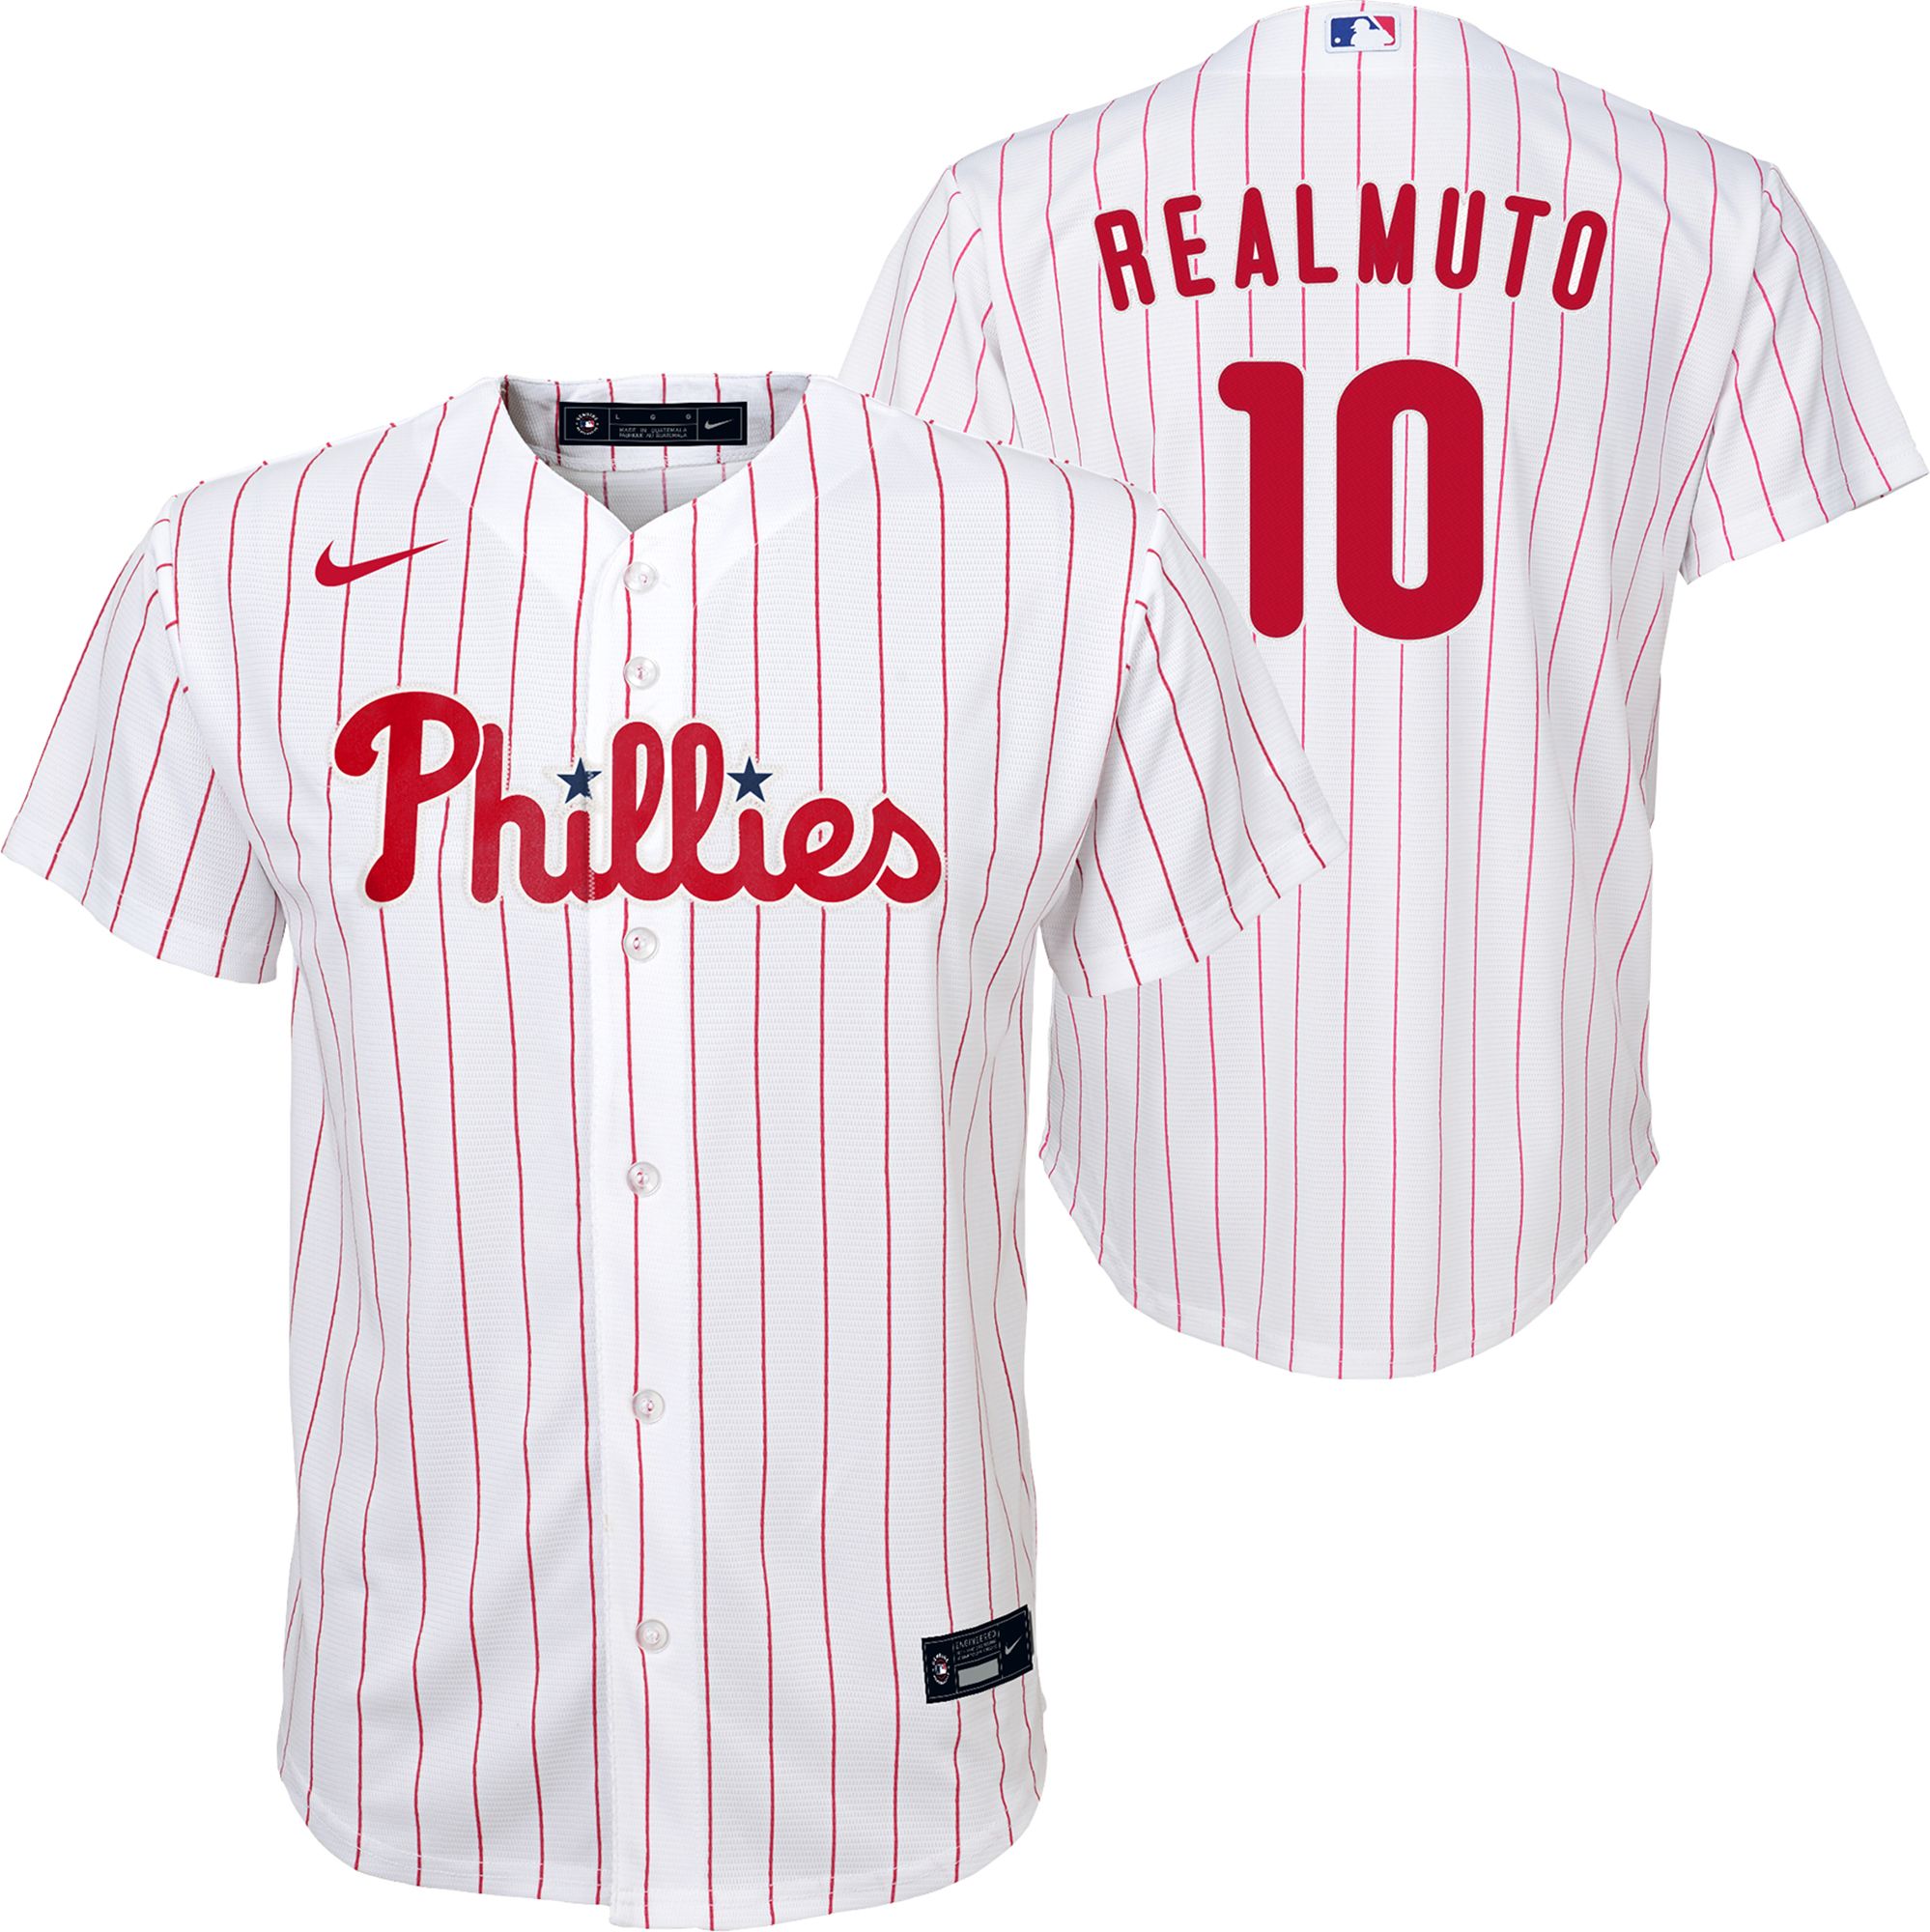 jt realmuto throwback jersey